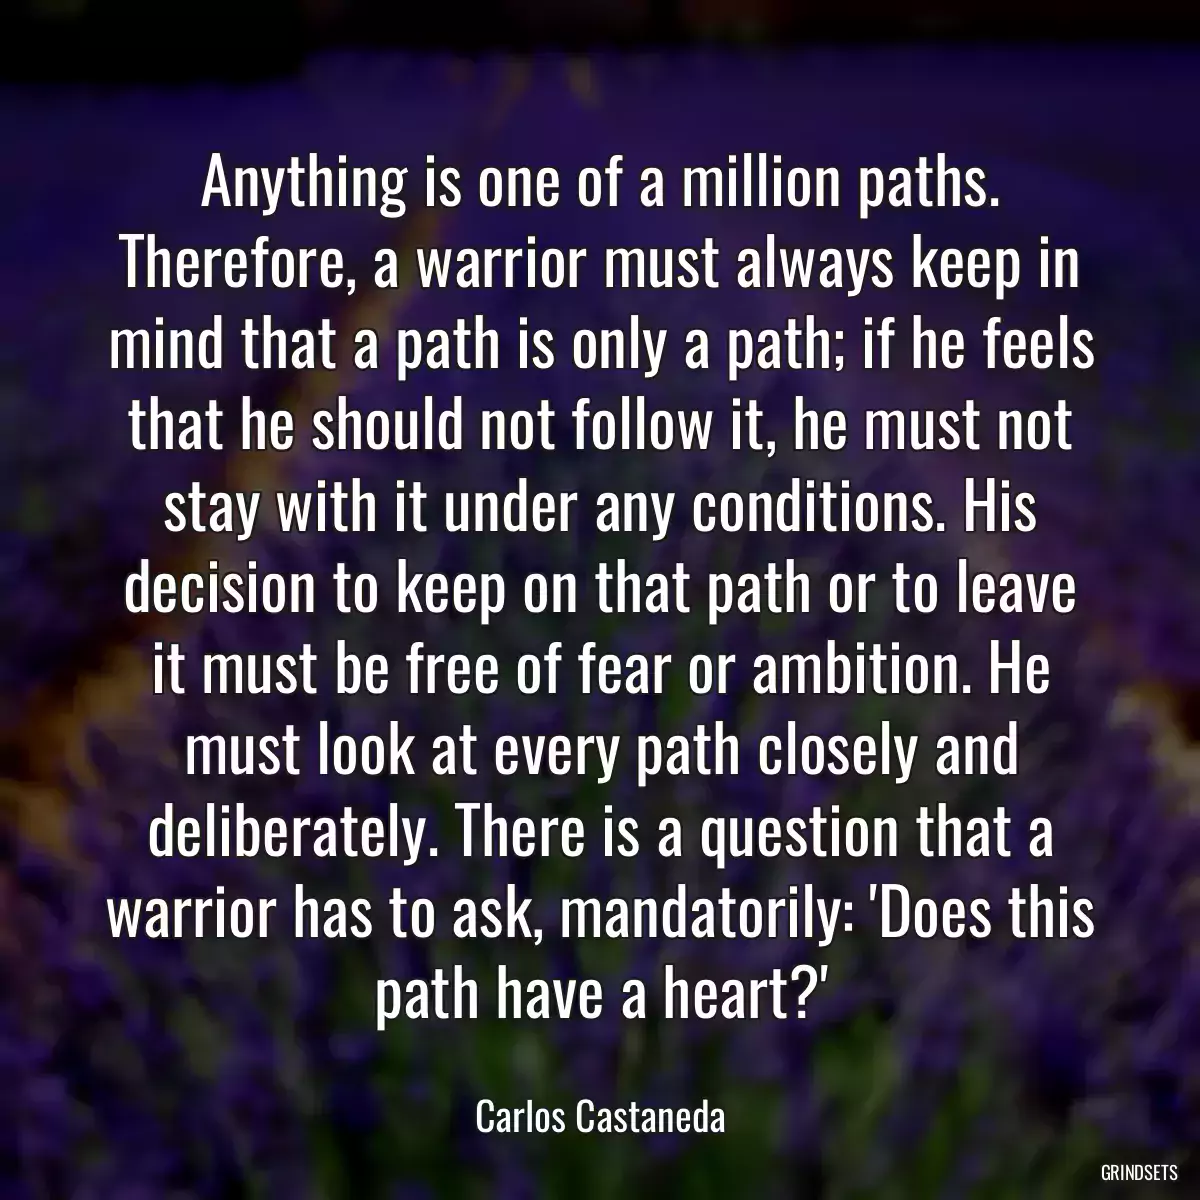 Anything is one of a million paths. Therefore, a warrior must always keep in mind that a path is only a path; if he feels that he should not follow it, he must not stay with it under any conditions. His decision to keep on that path or to leave it must be free of fear or ambition. He must look at every path closely and deliberately. There is a question that a warrior has to ask, mandatorily: \'Does this path have a heart?\'